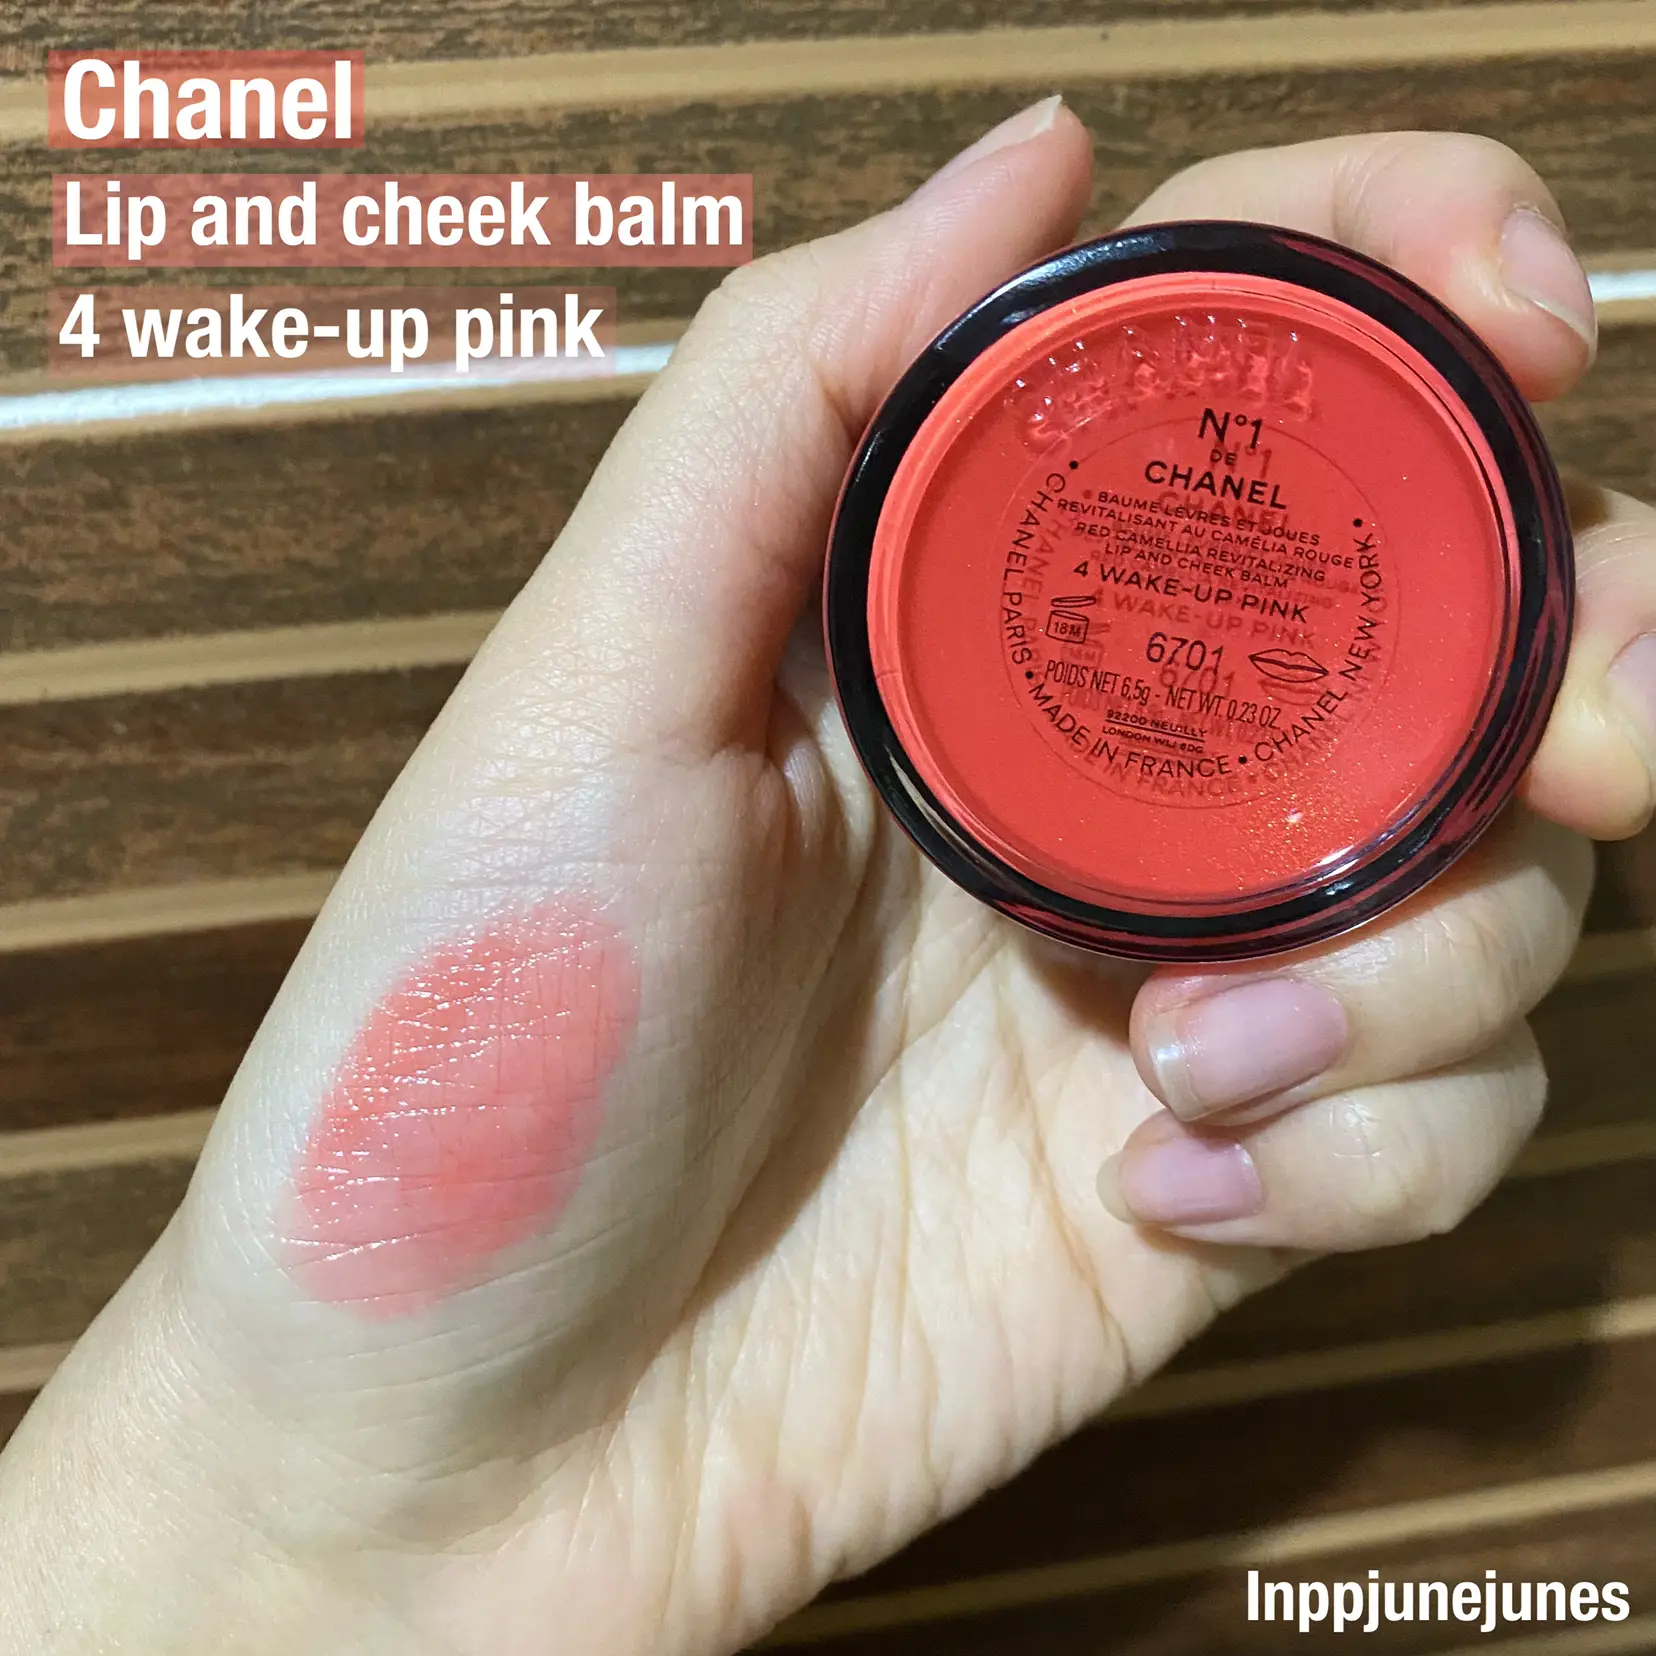 CHANEL, Makeup, Chanel De Chanel Lip And Cheek Balm In 4 Wake Up Pink Nwt